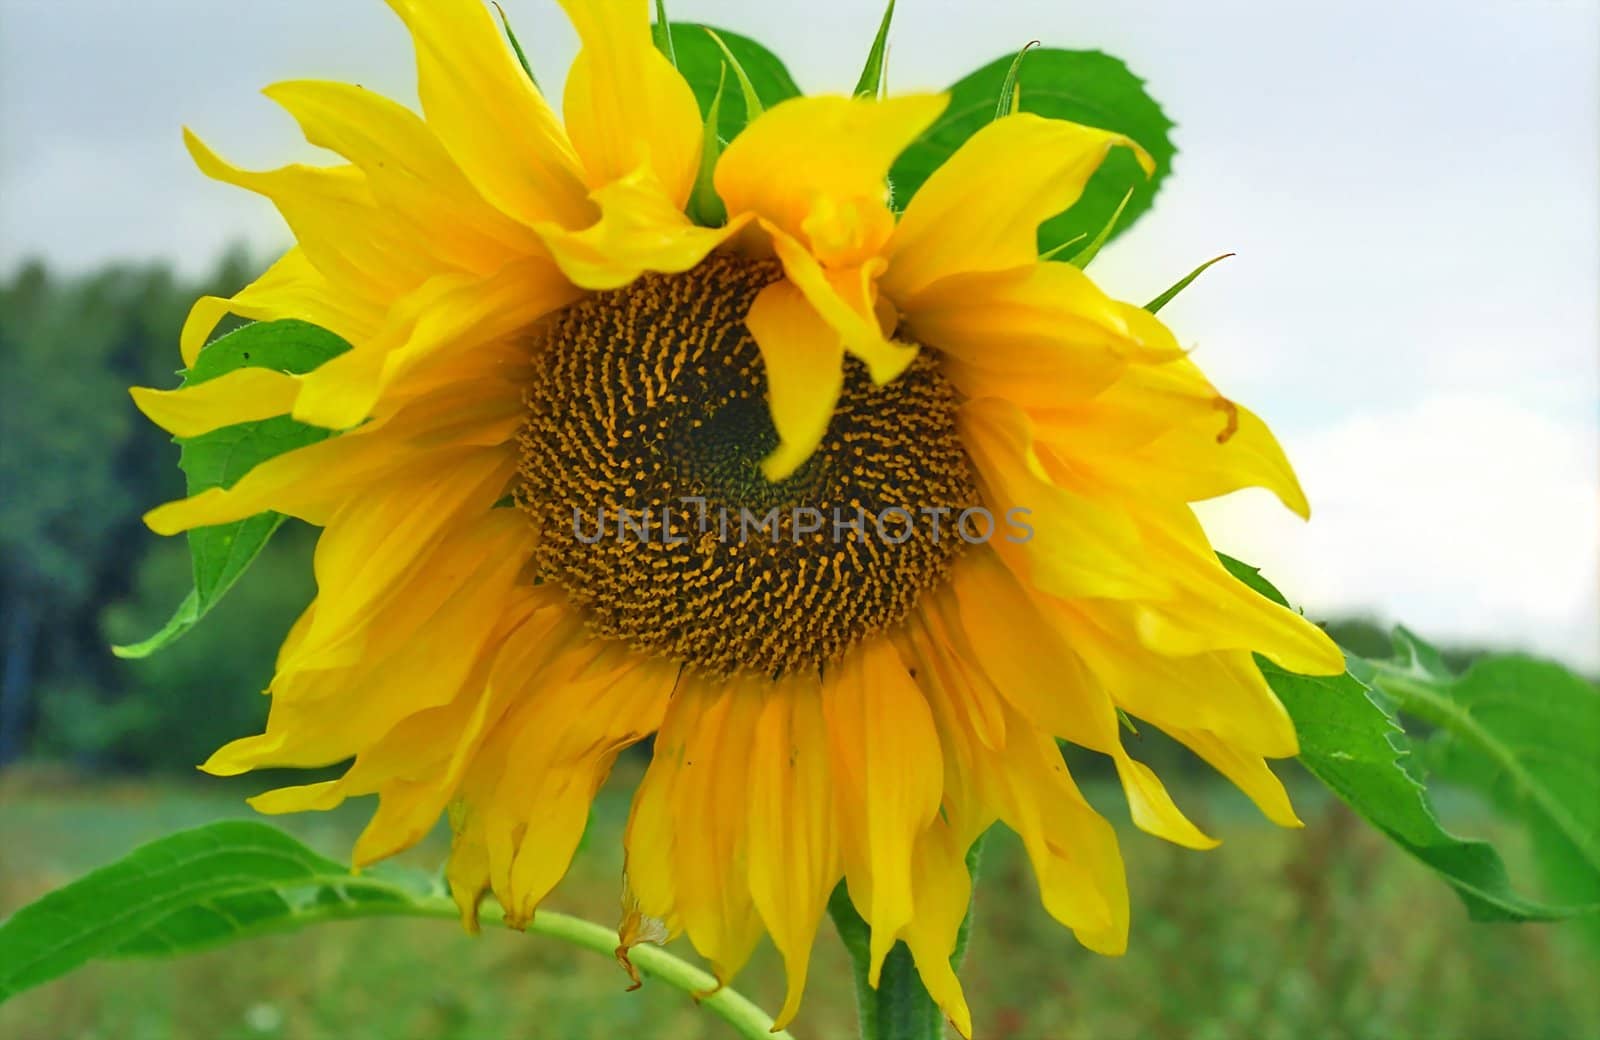 Sunflower in nature close-up